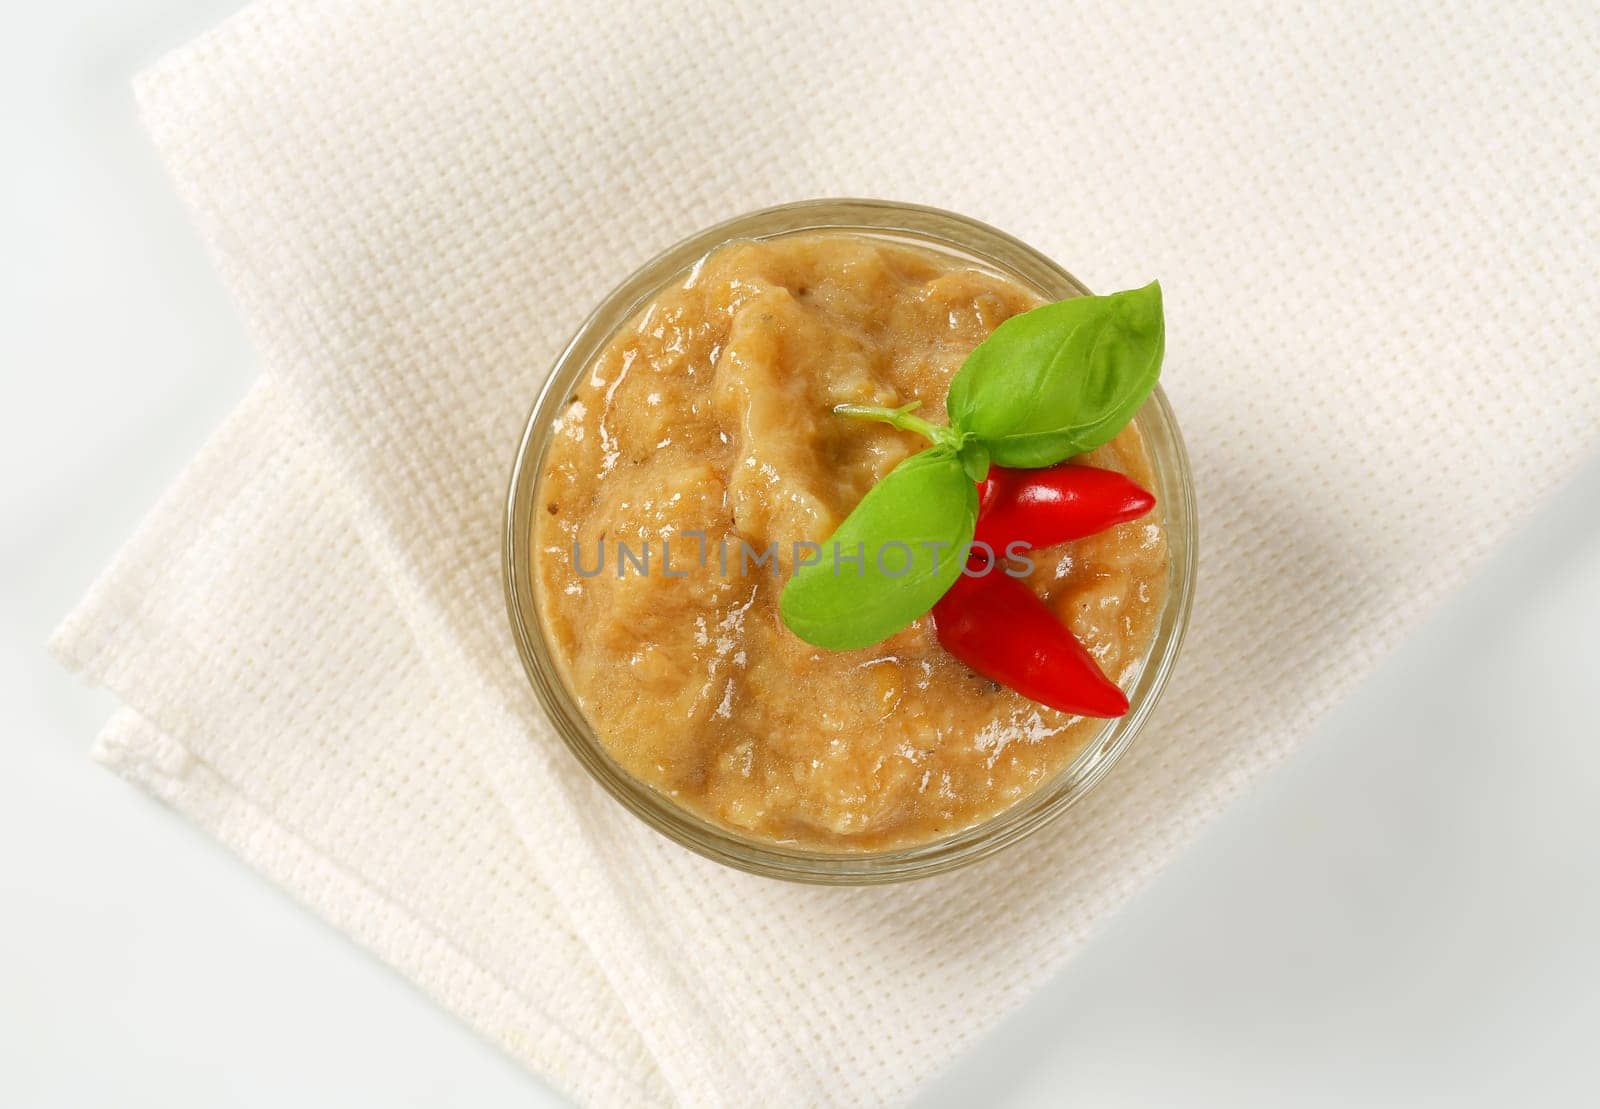 Eggplant (aubergine) dipping sauce or spread in small glass dish